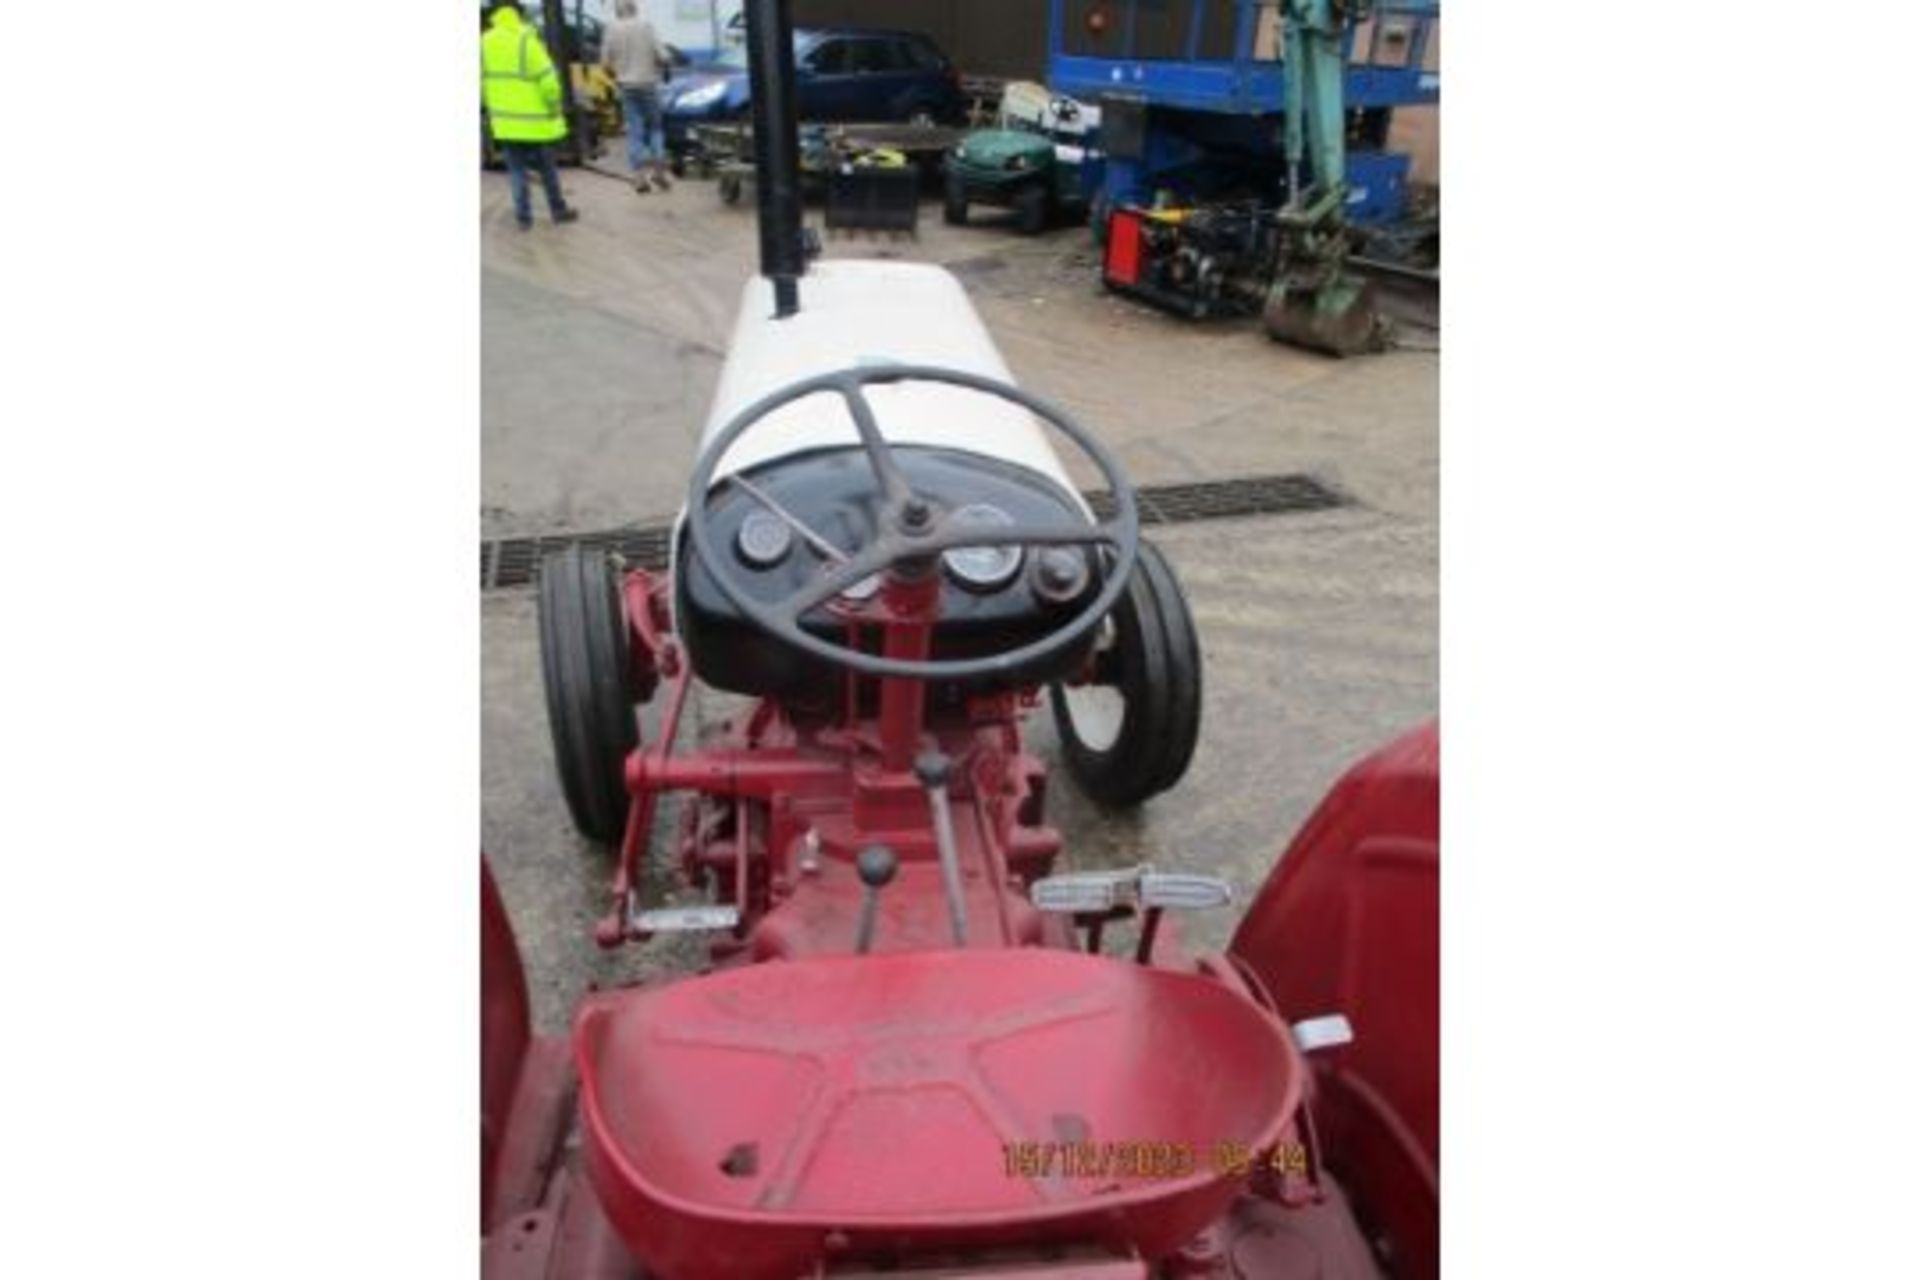 DAVID BROWN TRACTOR - Image 6 of 6